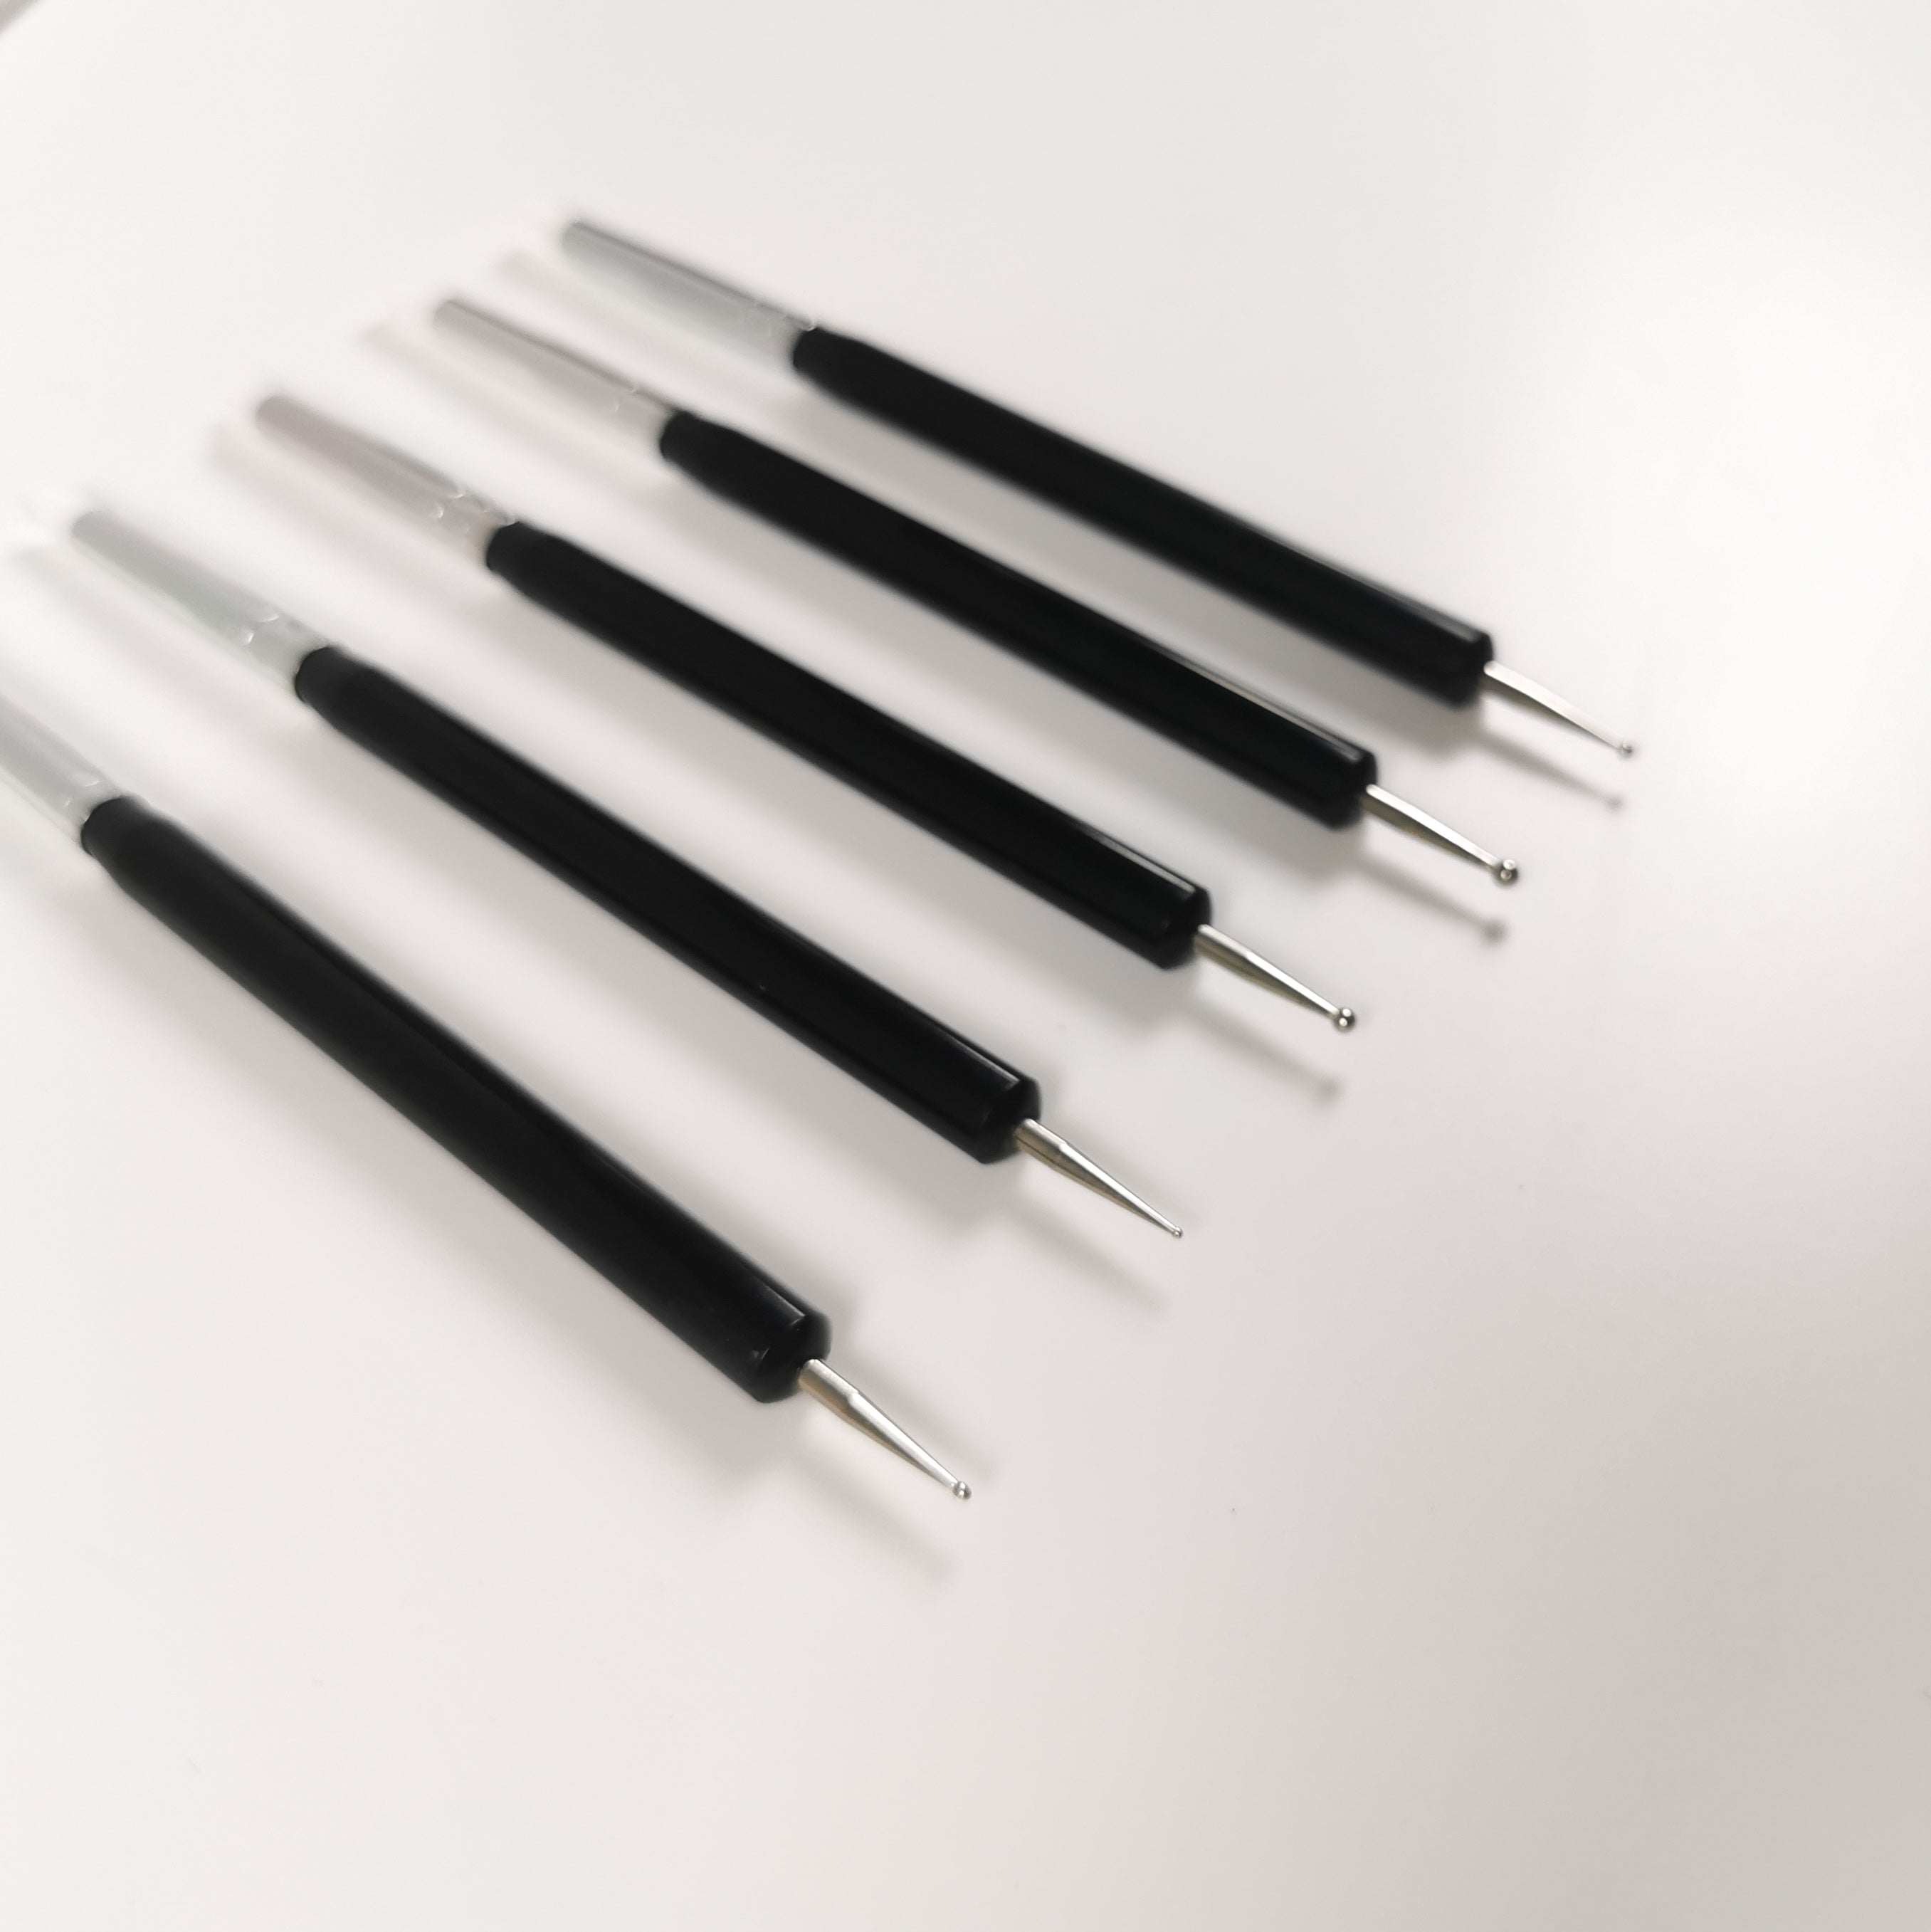 Silicon Tip Shaping and Ball Stylus Dotting Tool